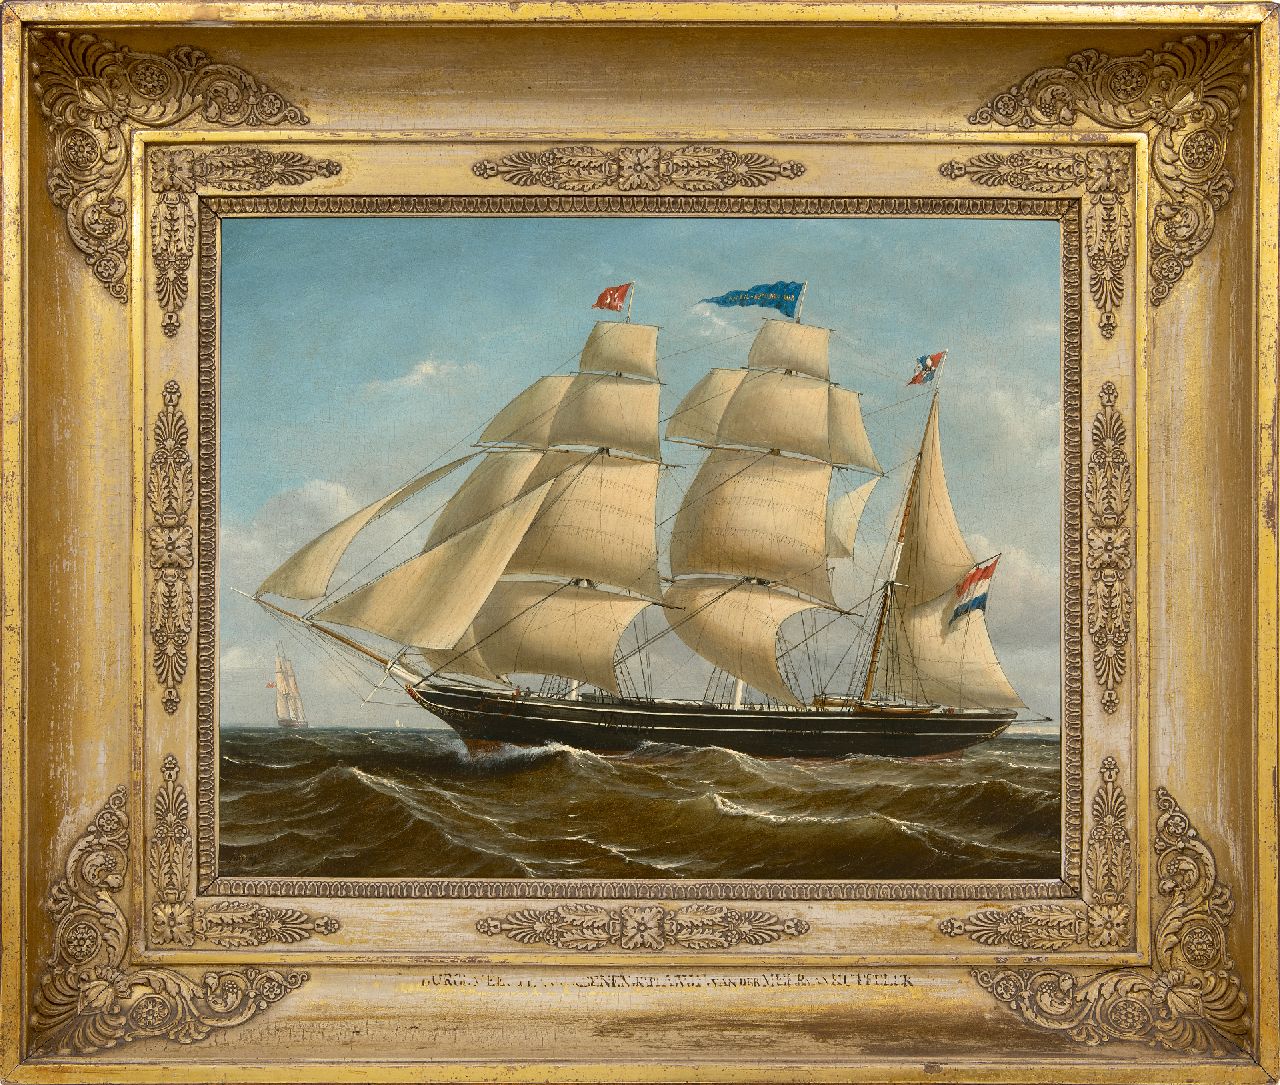 Schiedges P.P.  | Petrus Paulus Schiedges | Paintings offered for sale | The threemaster Burgemeester Van Rheenen, sailing downwind, oil on panel 40.0 x 50.8 cm, signed l.l. and dated 1858